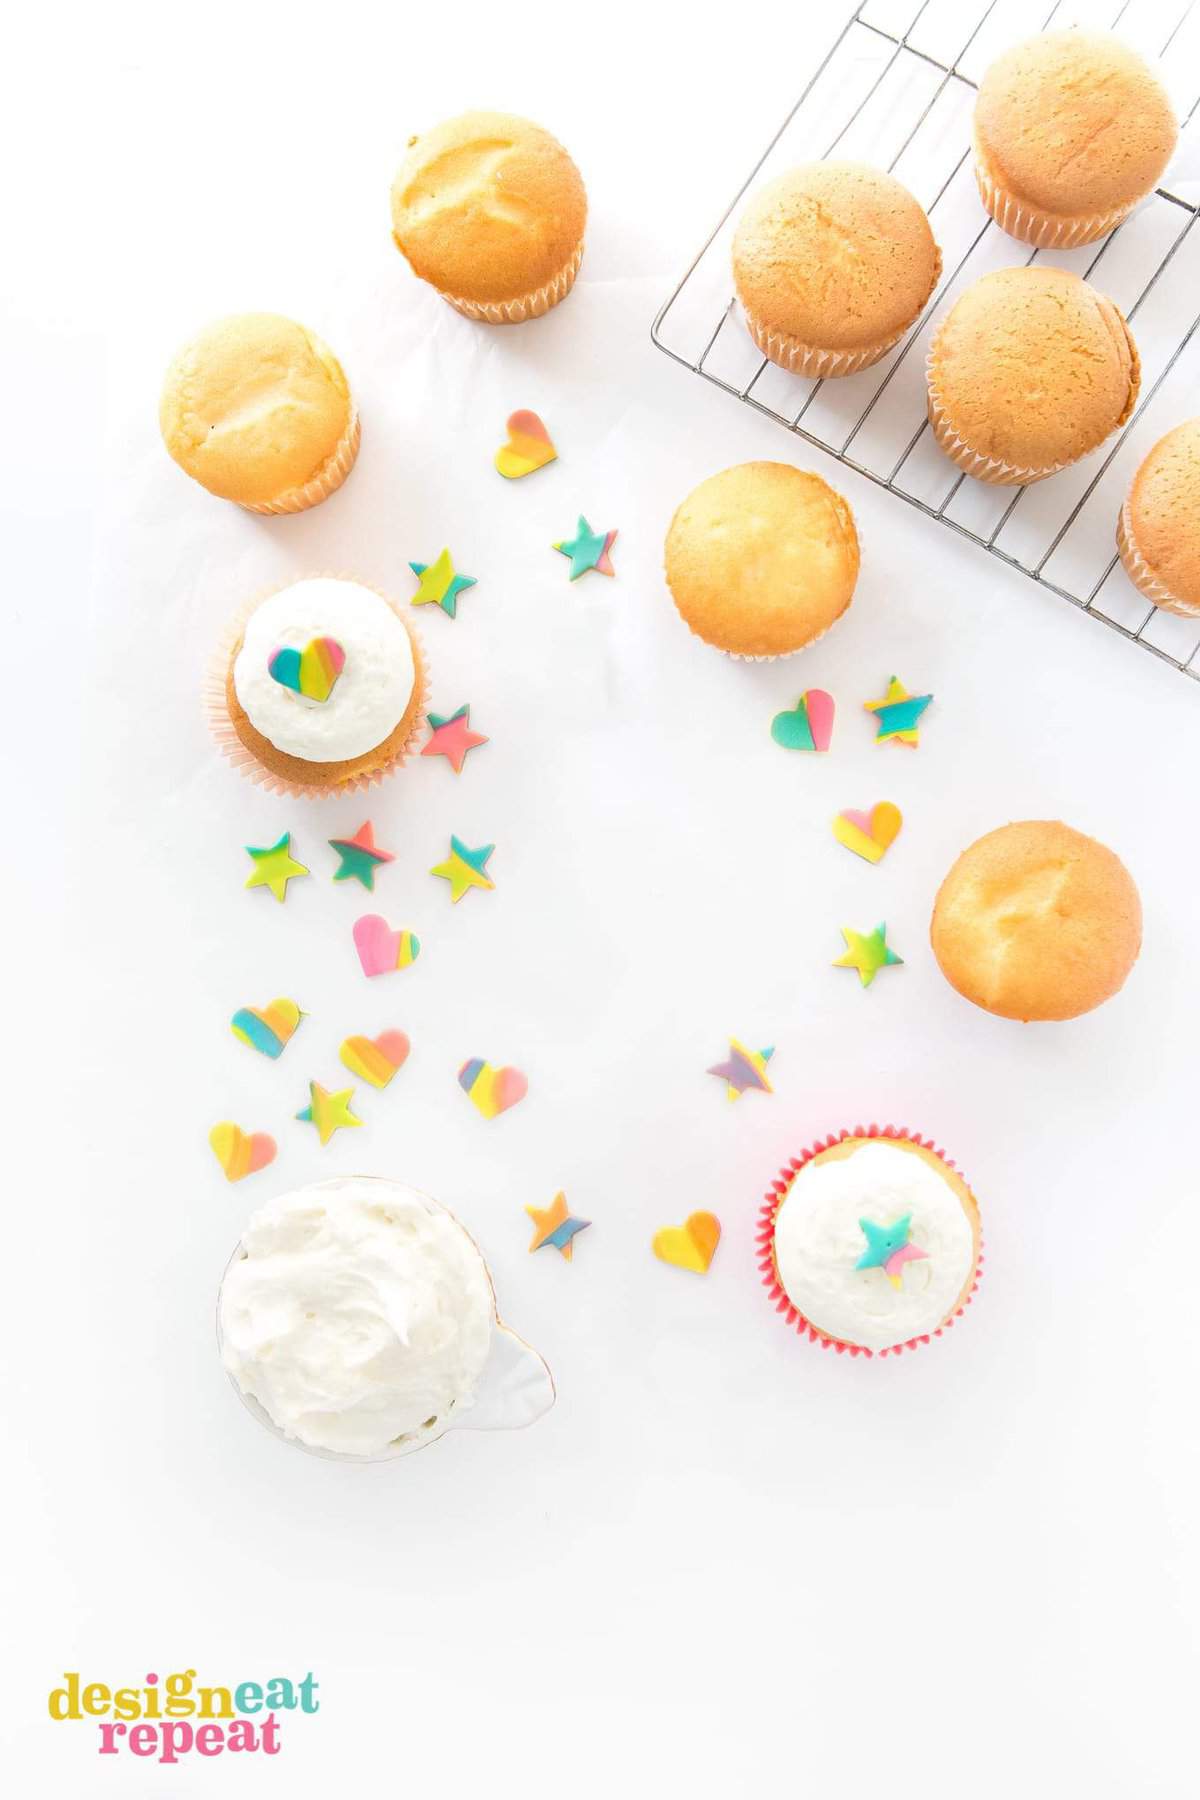 Learn how to make these EASY homemade rainbow sprinkles! Perfect way to turn any baked creation into a colorful treat!